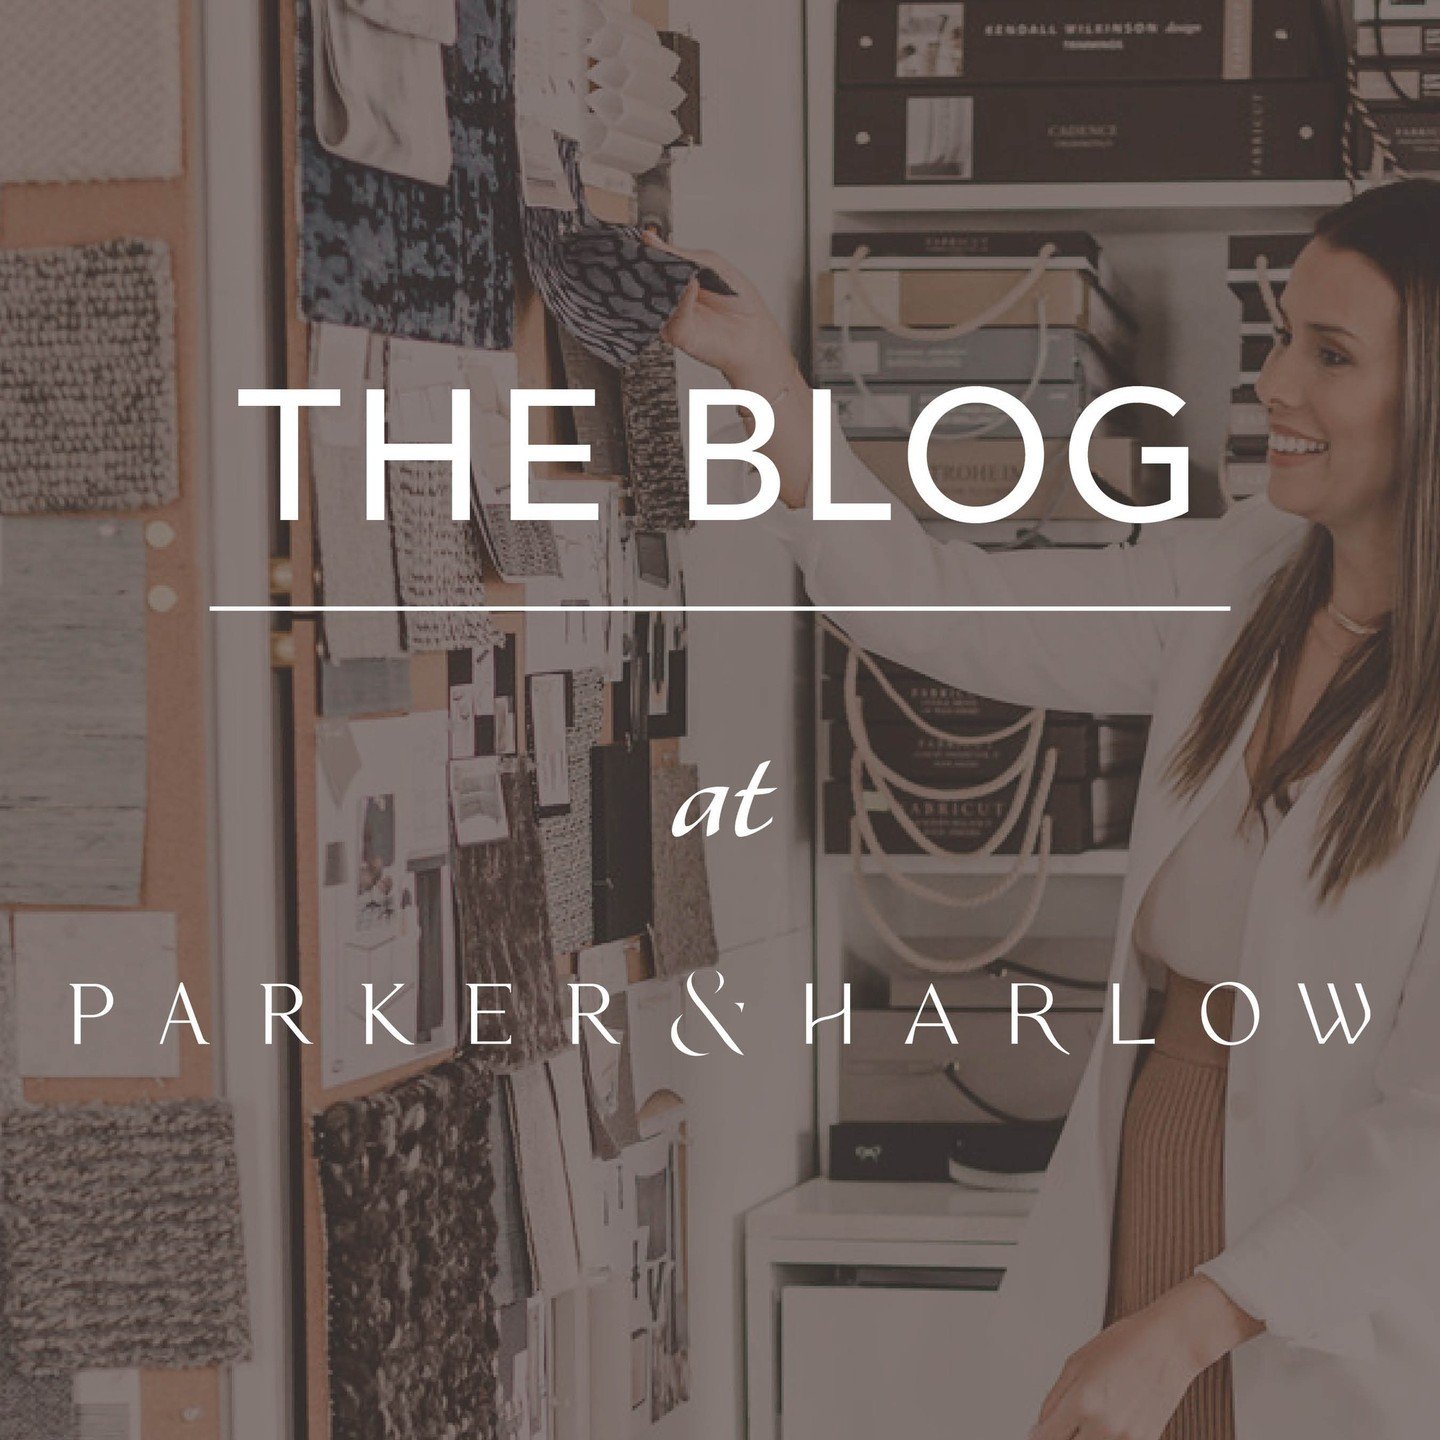 NEW LAUNCH: THE BLOG | LINK IN BIO

These have been a big few weeks for us here, and the fun isn't stopping anytime soon. We've officially launched The Blog at Parker &amp; Harlow, a space for creative dialogue, new and exciting happenings, editorial